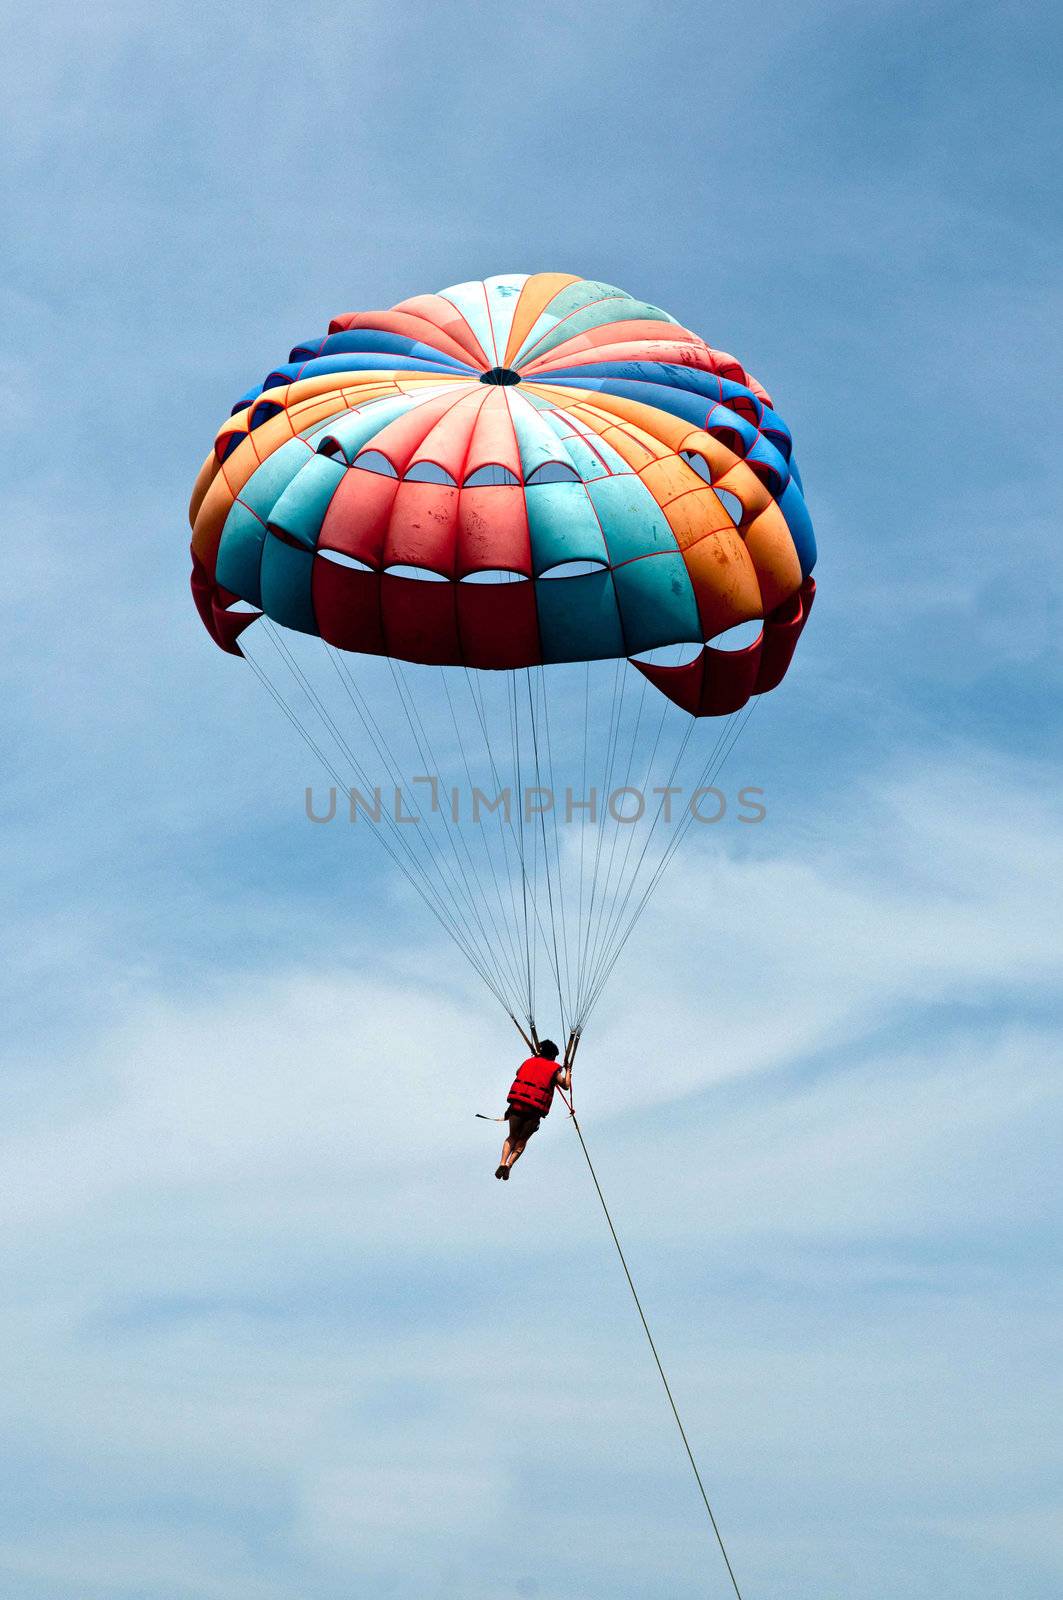 Paraglider launching from the ridge with colorful canopy against a blue sky.